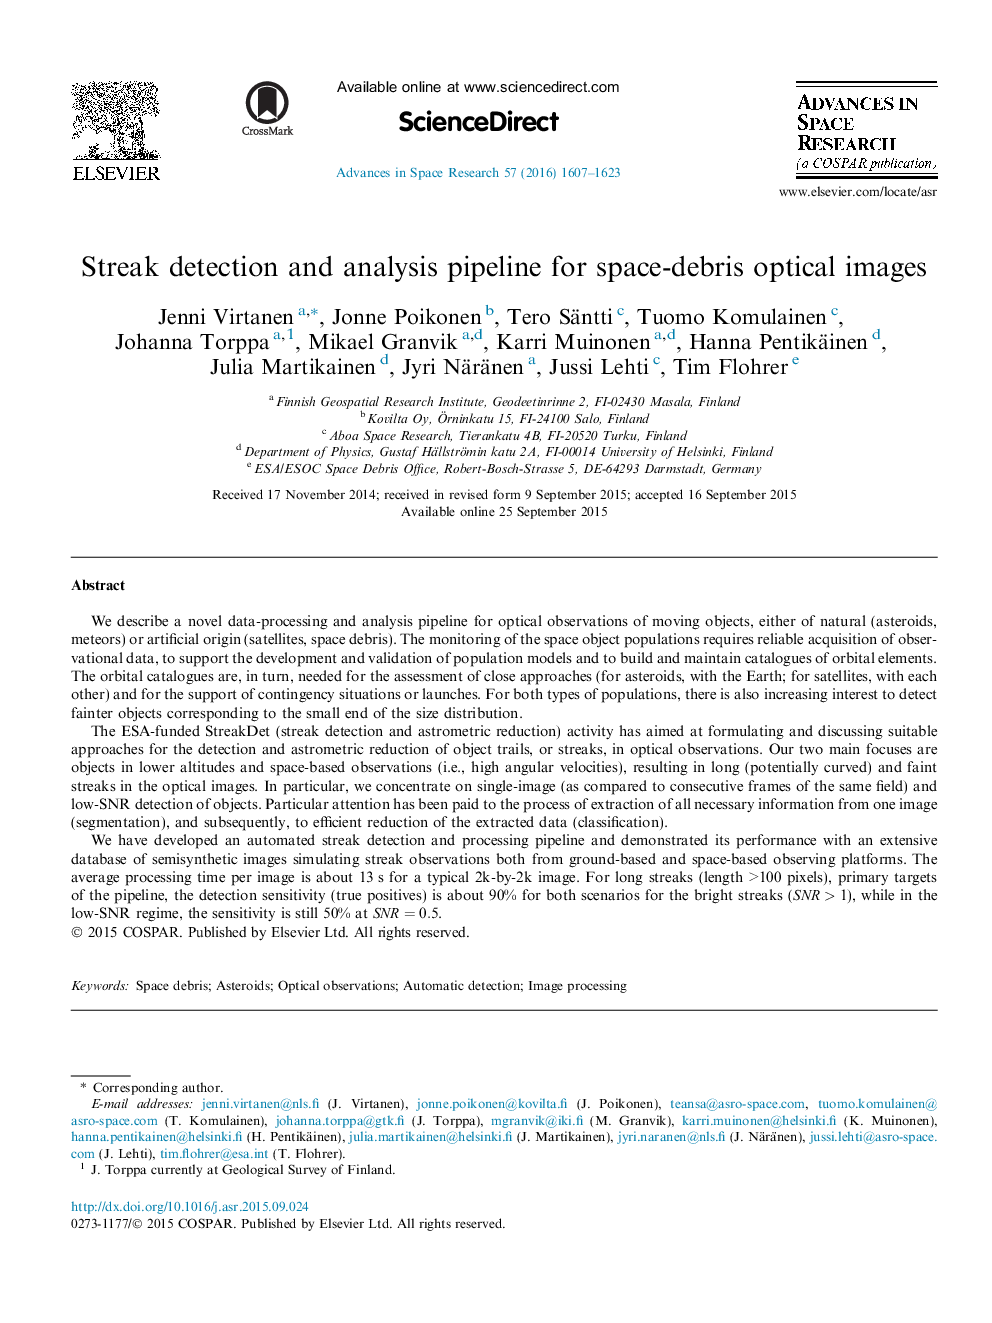 Streak detection and analysis pipeline for space-debris optical images